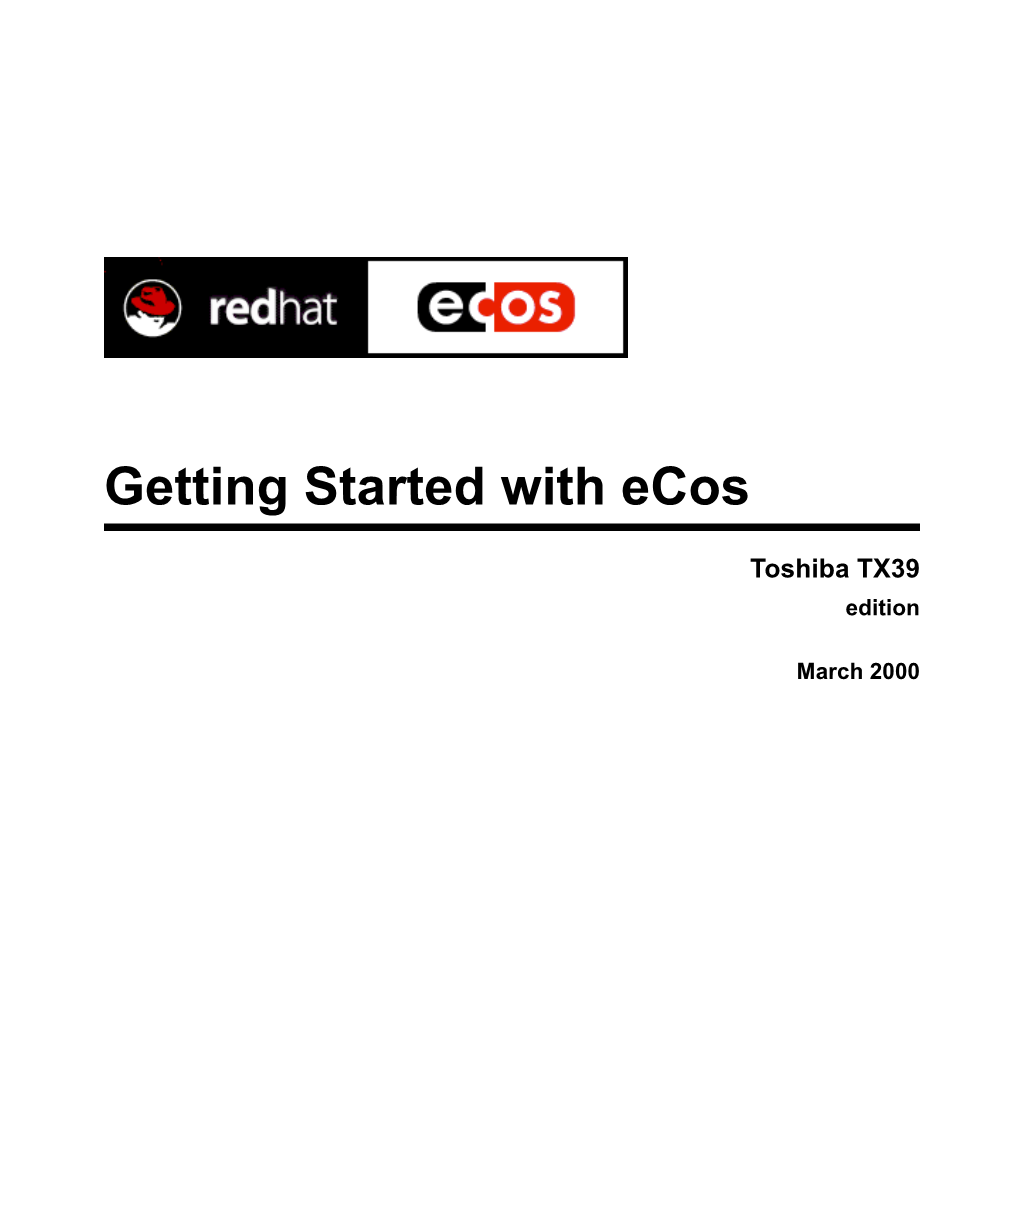 Getting Started with Ecos